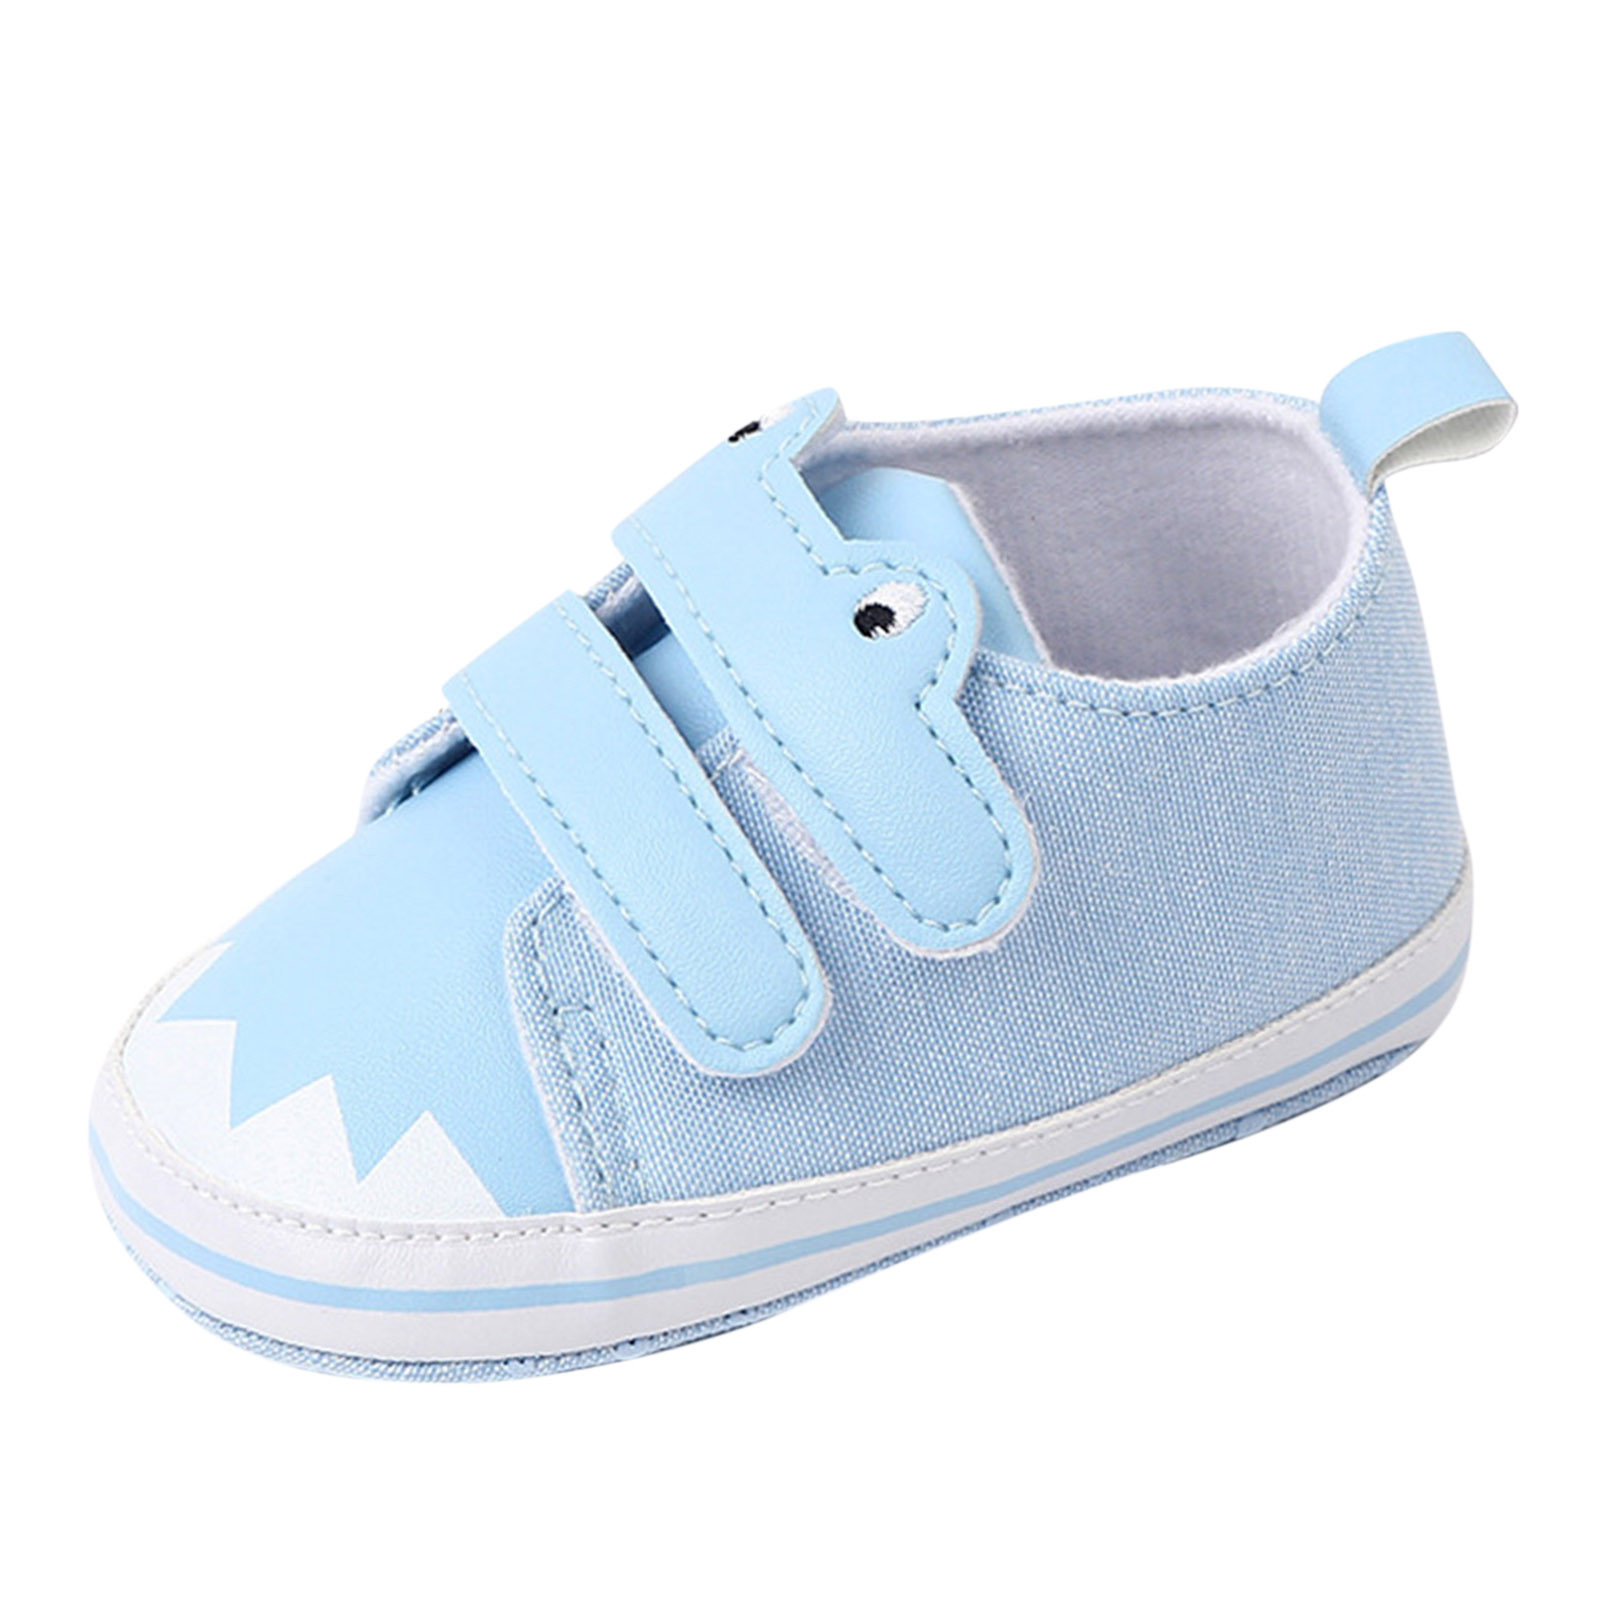 Toddler Shoes Spring Summer Kids Flat Sole Light Comfortable Cute ...